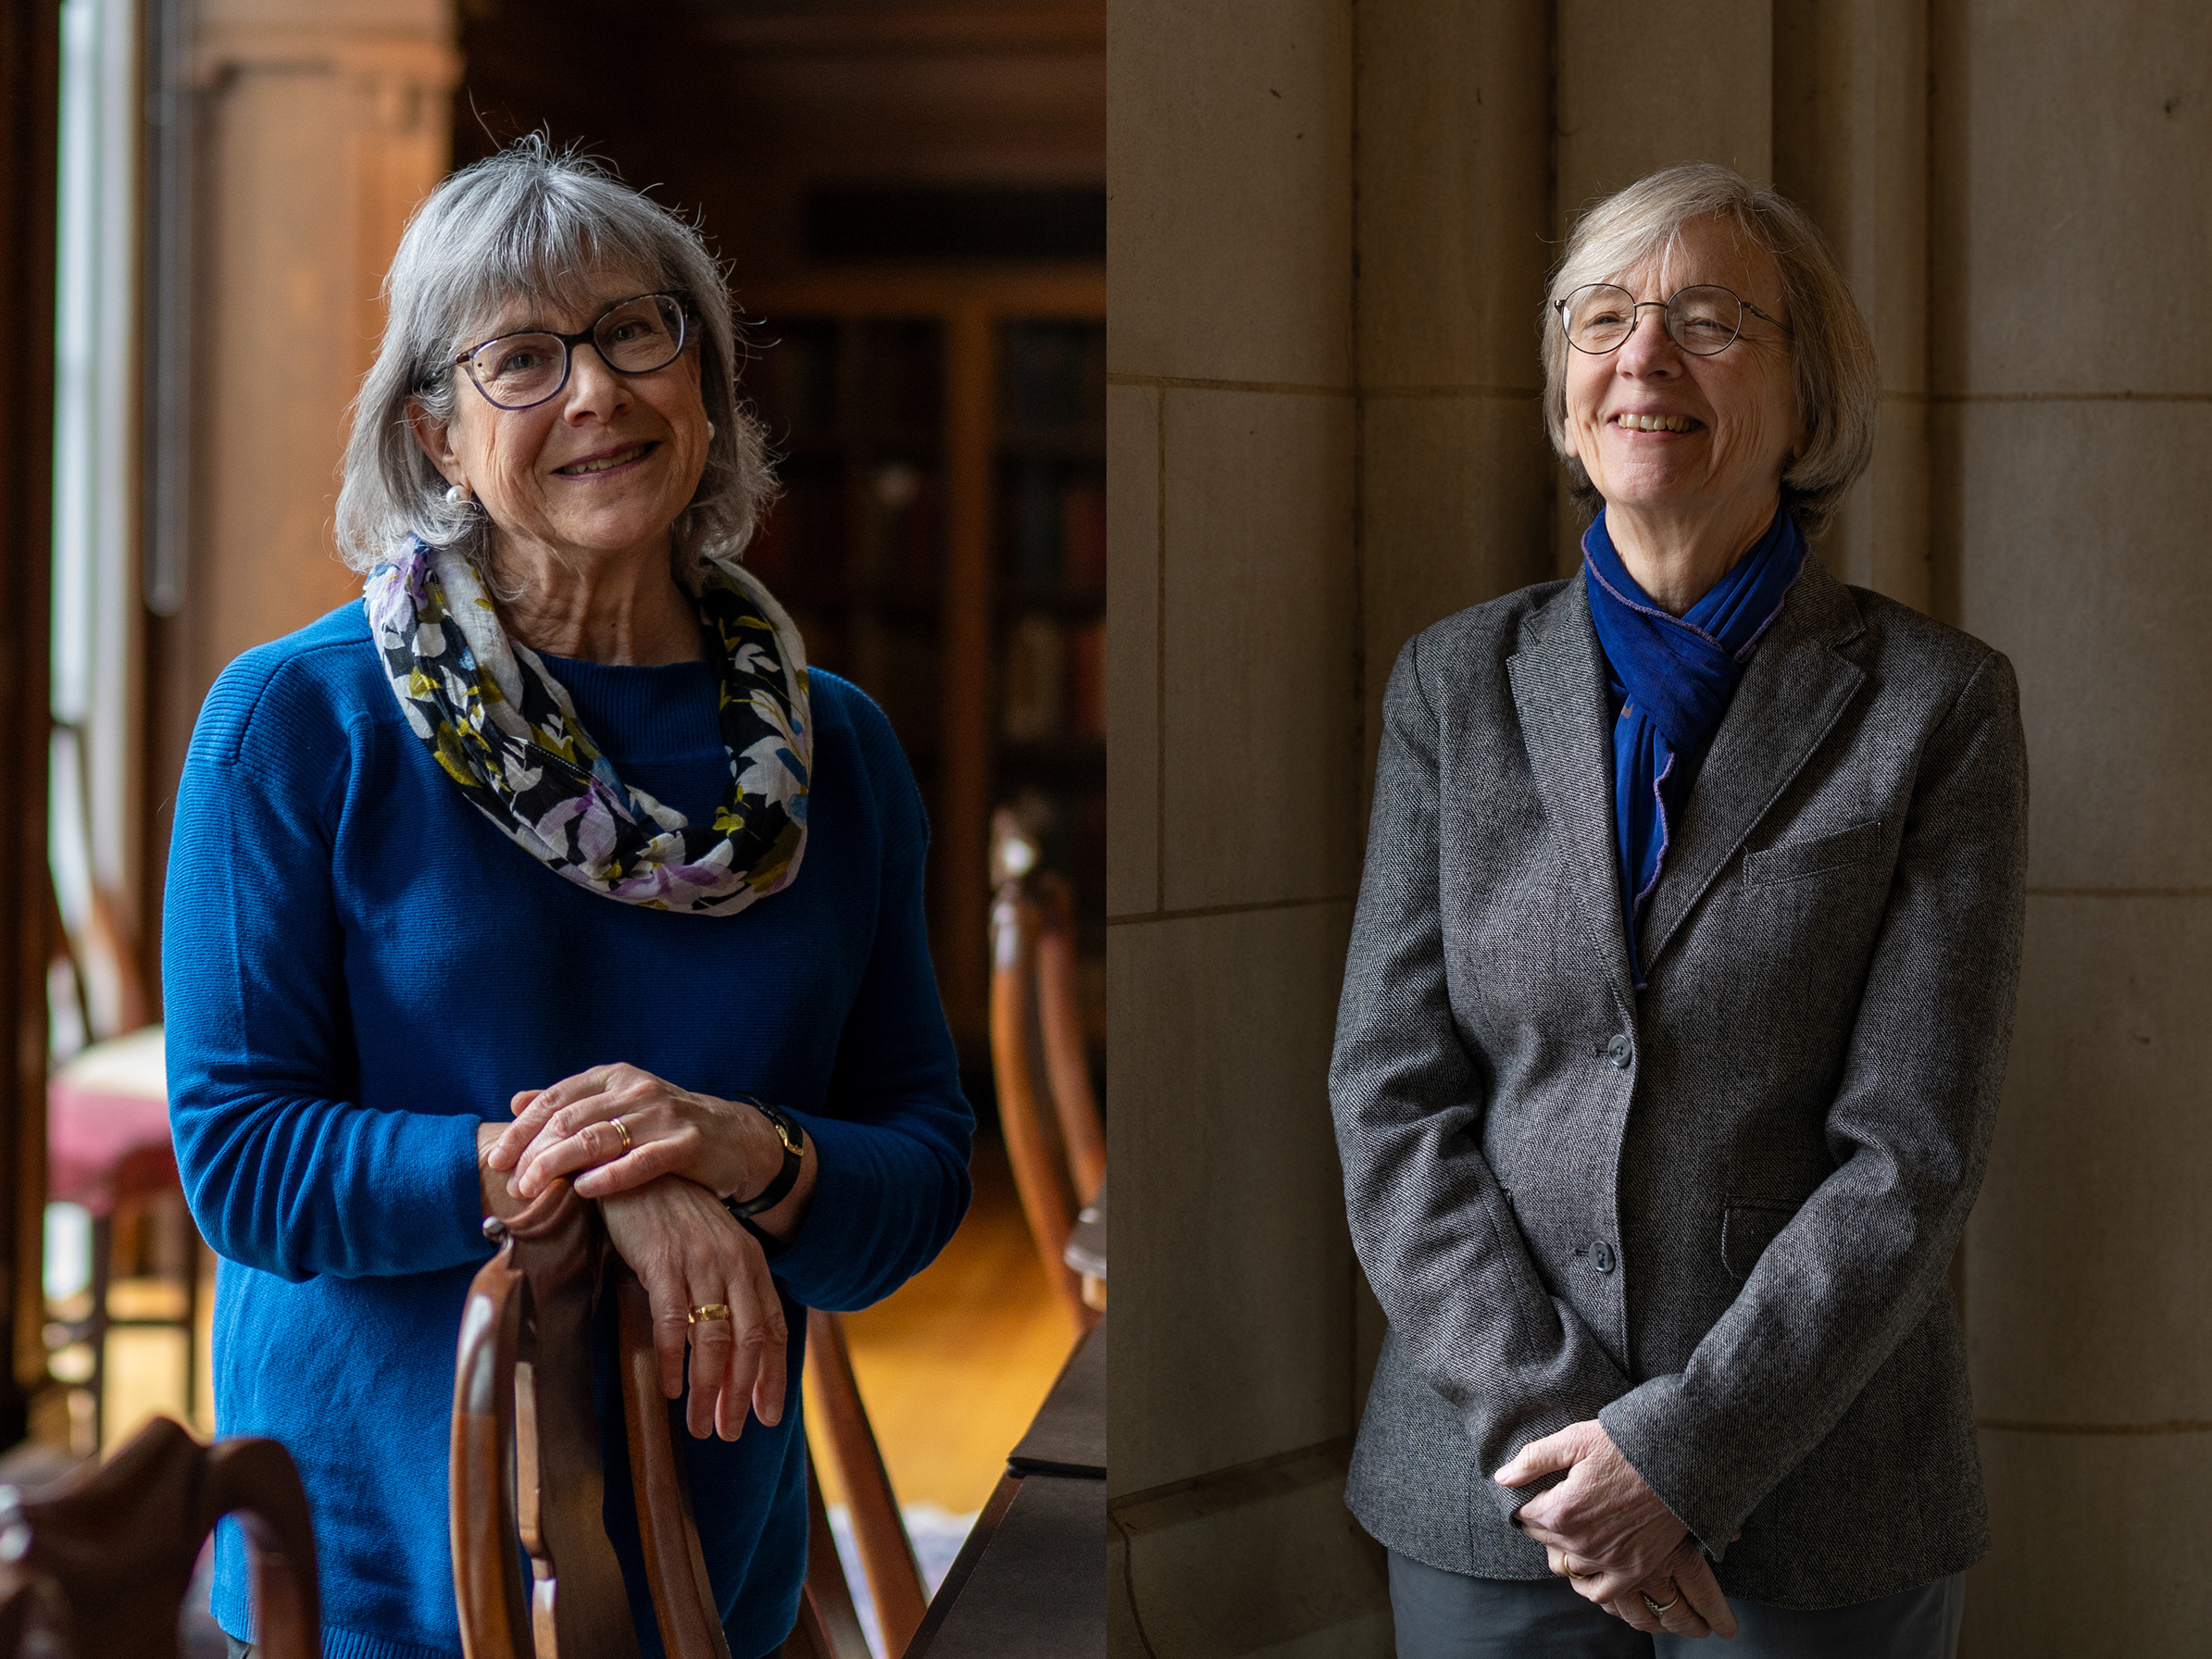 Scholars Susan Ashbrook Harvey, left, and Robin Darling Young became 'sworn siblings' after an ancient ritual at the Church of the Holy Sepulchre in Jerusalem.